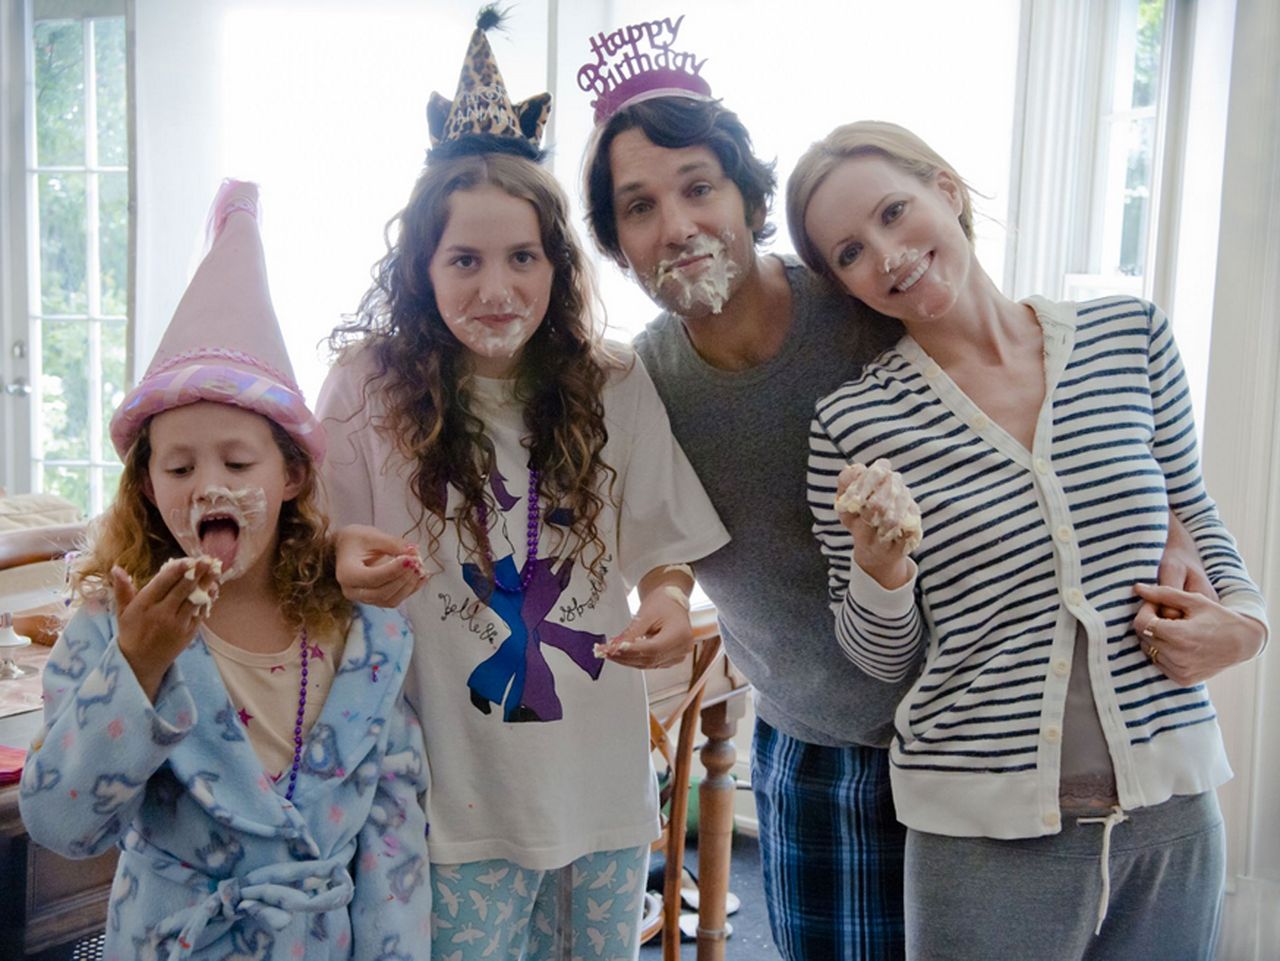 From left: Iris Apatow, Maude Apatow, Rudd and Mann in a promotional photo for "That's 40."